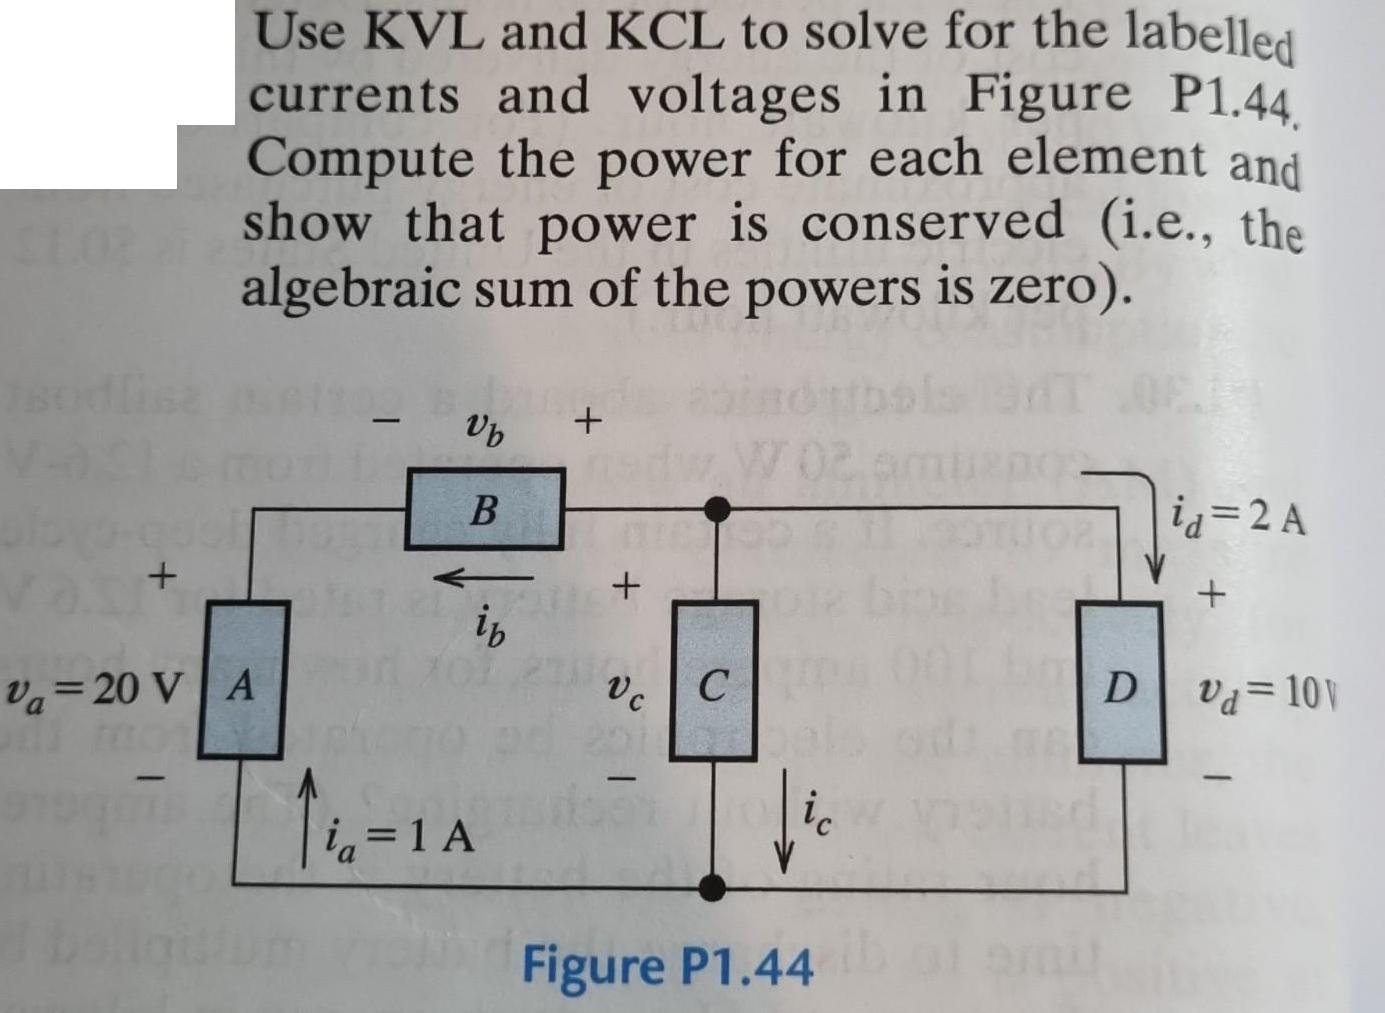 + Use KVL and KCL to solve for the labelled currents and voltages in Figure P1.44 Compute the power for each